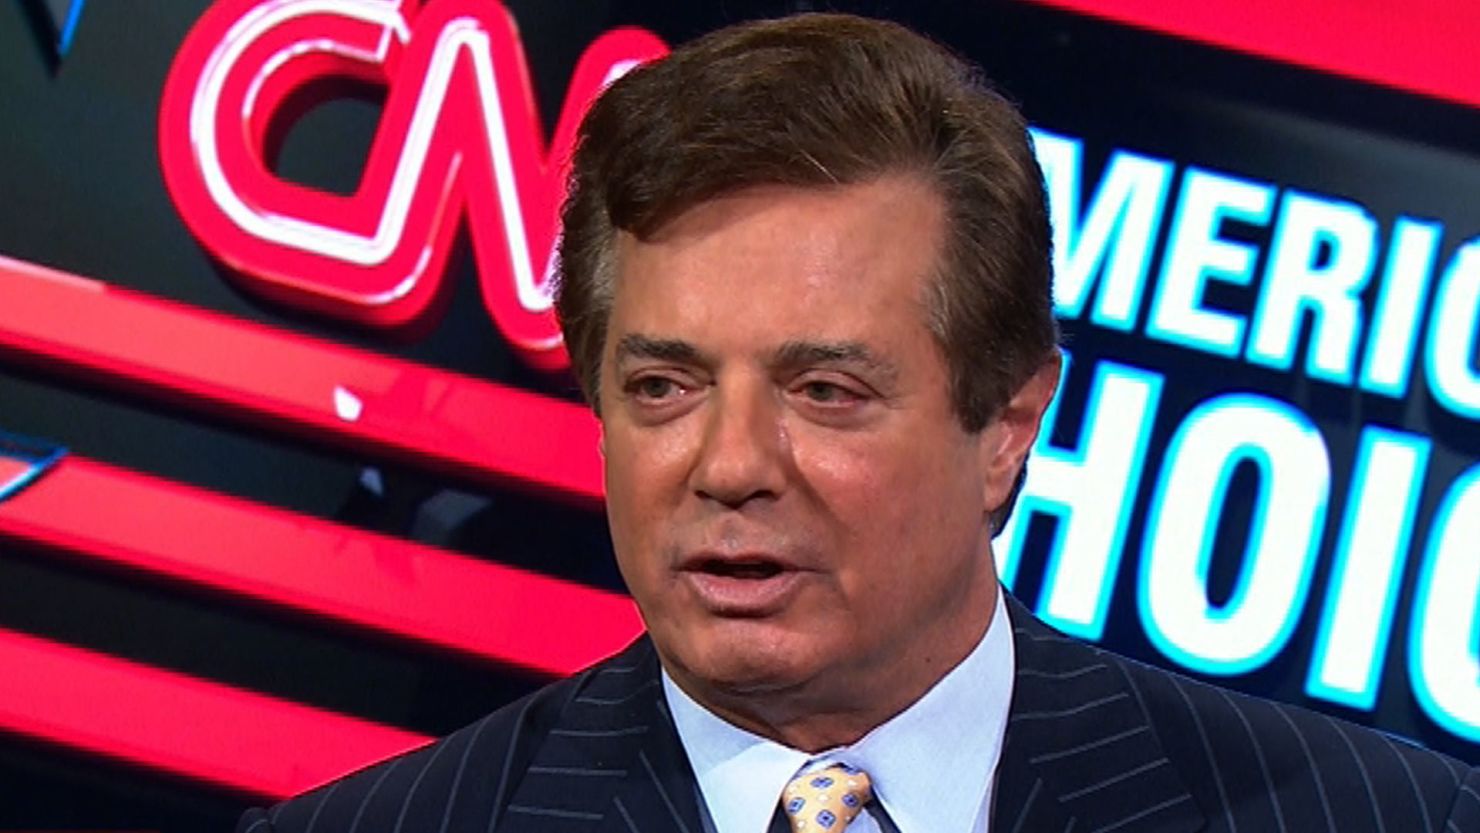 Paul Manafort Trump convention manager newday_00000000